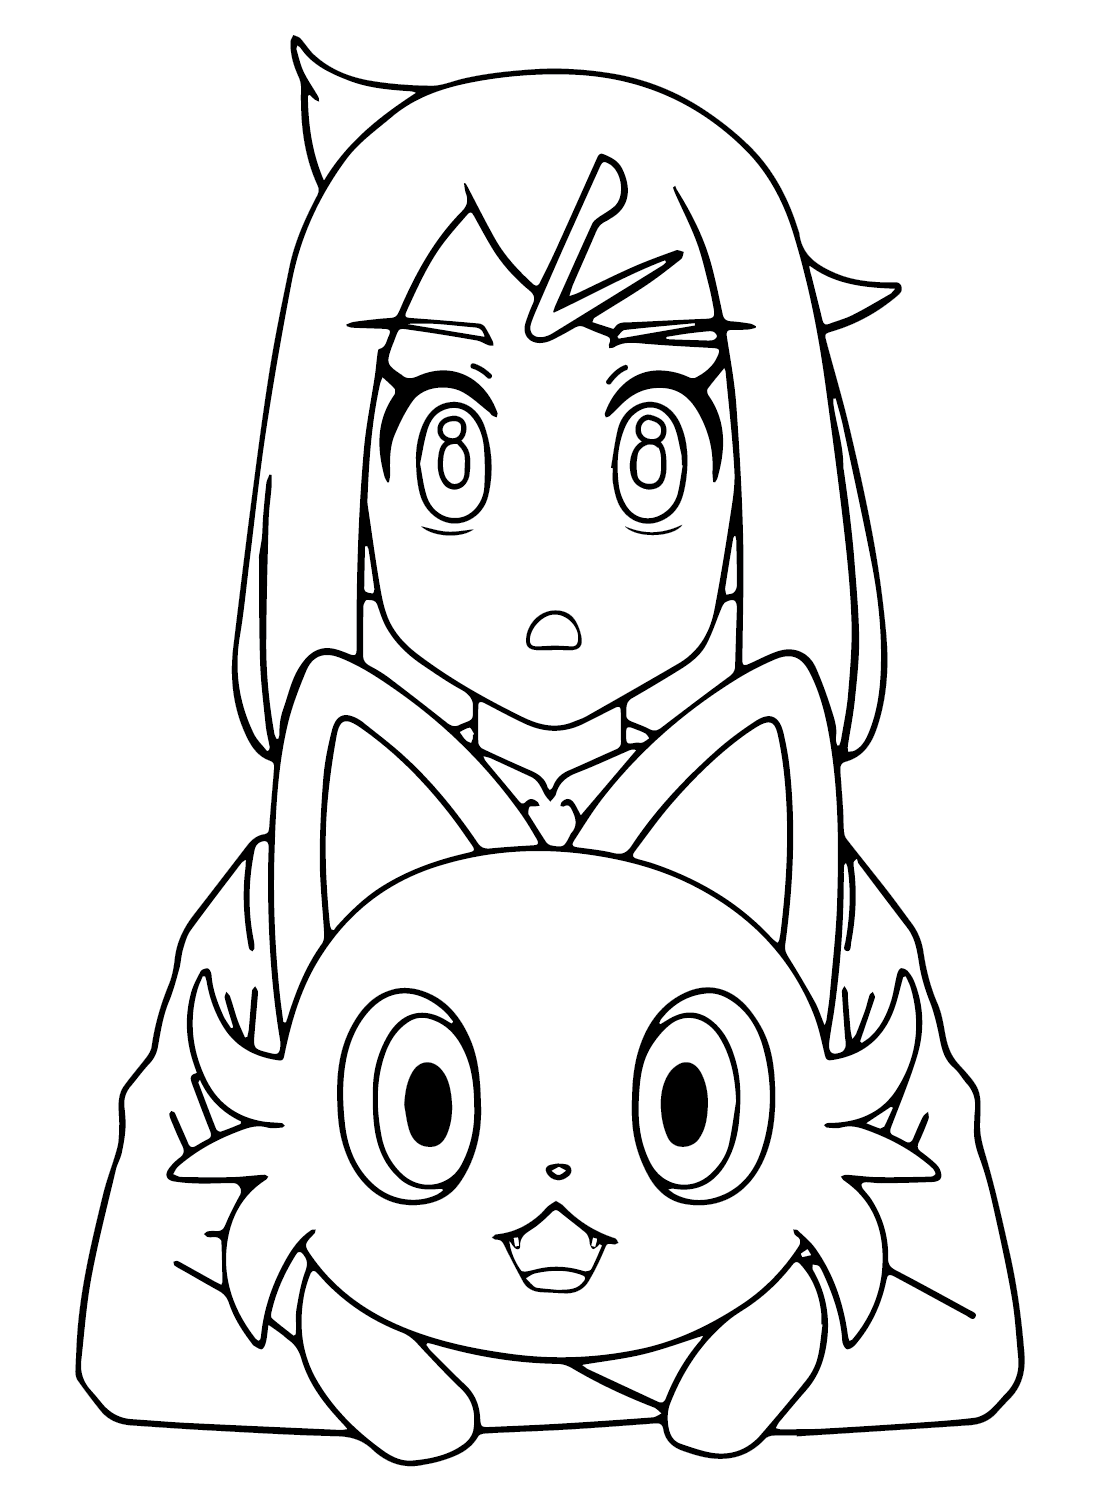 Liko Pokemon Coloring Pages to Download from Liko Pokemon